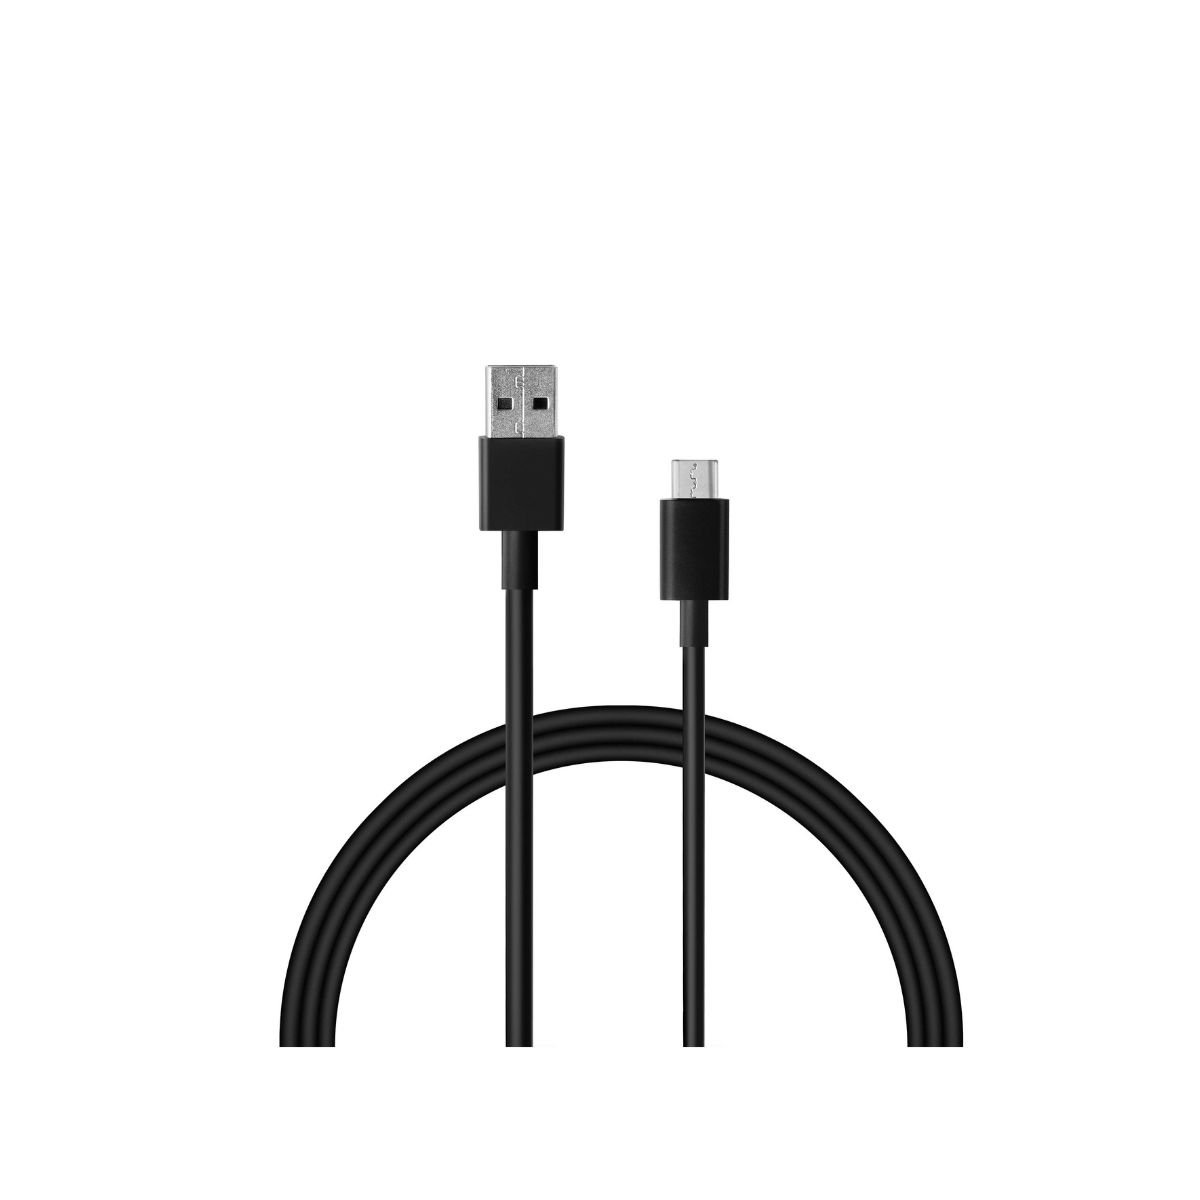 Mi USB Type C Fast Charge Cable - Black